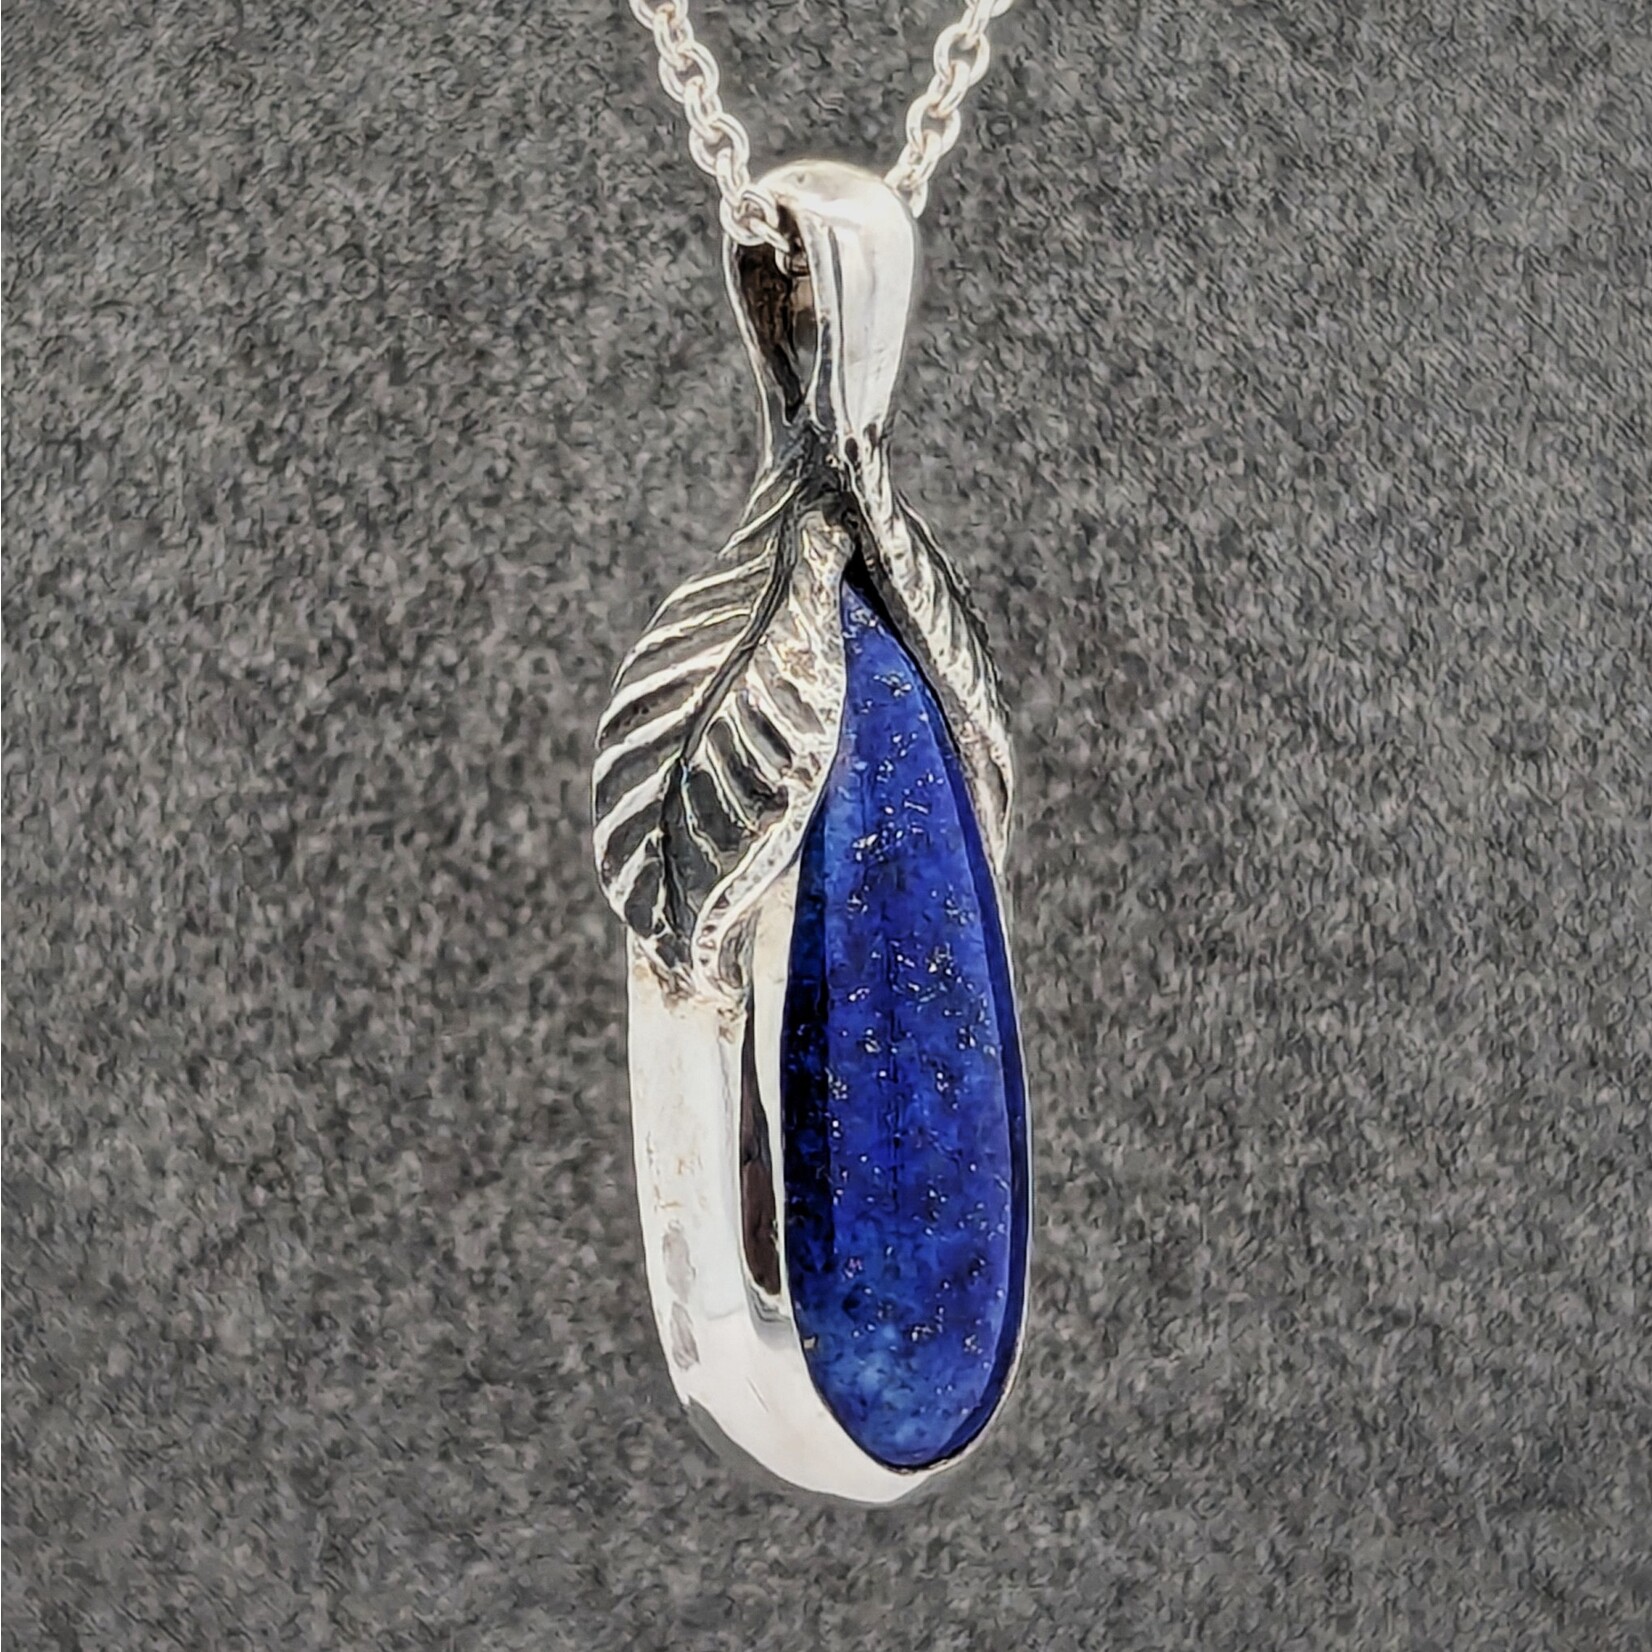 Carrie Nunes Jewelry Carved Leaves Lapis Drop Pendant